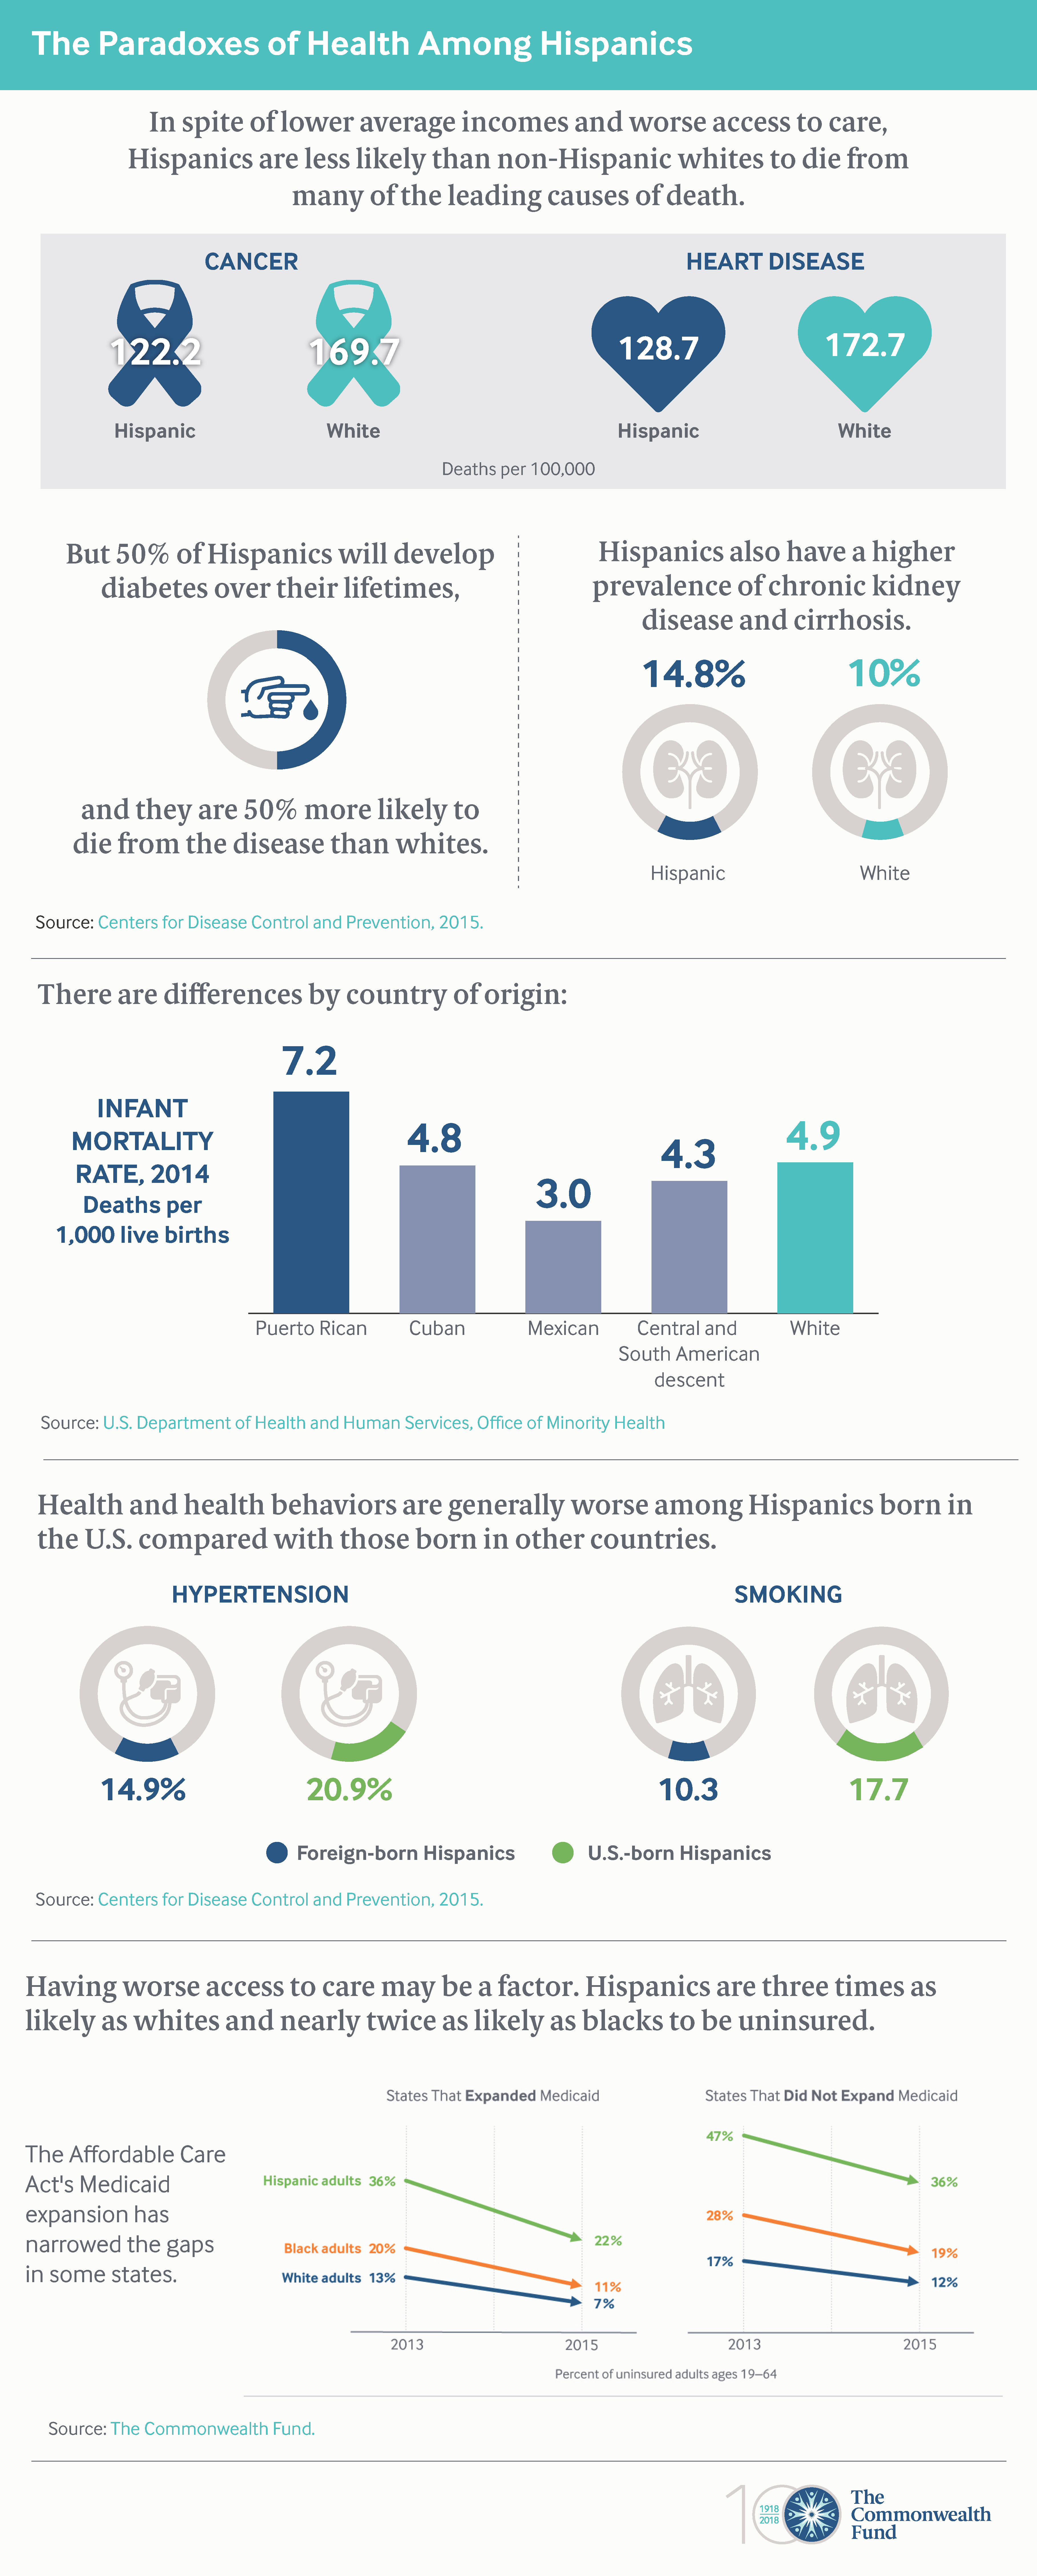 The Paradoxes of Health Among Hispanics infographic